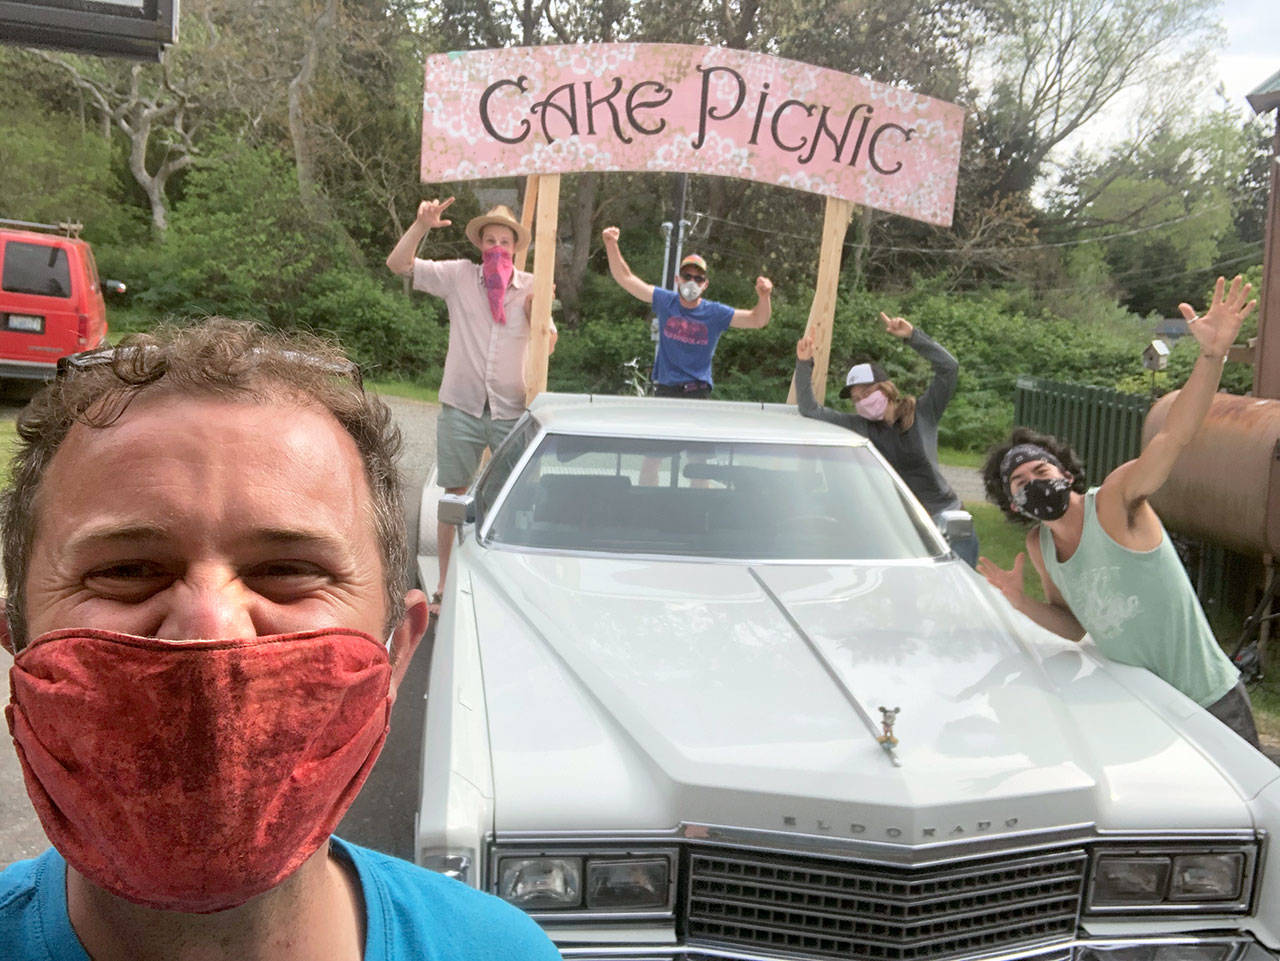 Danny Milholland, longtime organizer of the Cake Picnic, grins behind a face mask in front of the ‘78 Cadillac flatbed that will bring music to Port Townsend residents’ homes Saturday, May 16, 2020. Behind him, from left, are Kellen Lynch, Ben Krabil, Allison Barrett and Tomoki Sage. (Submitted photo)